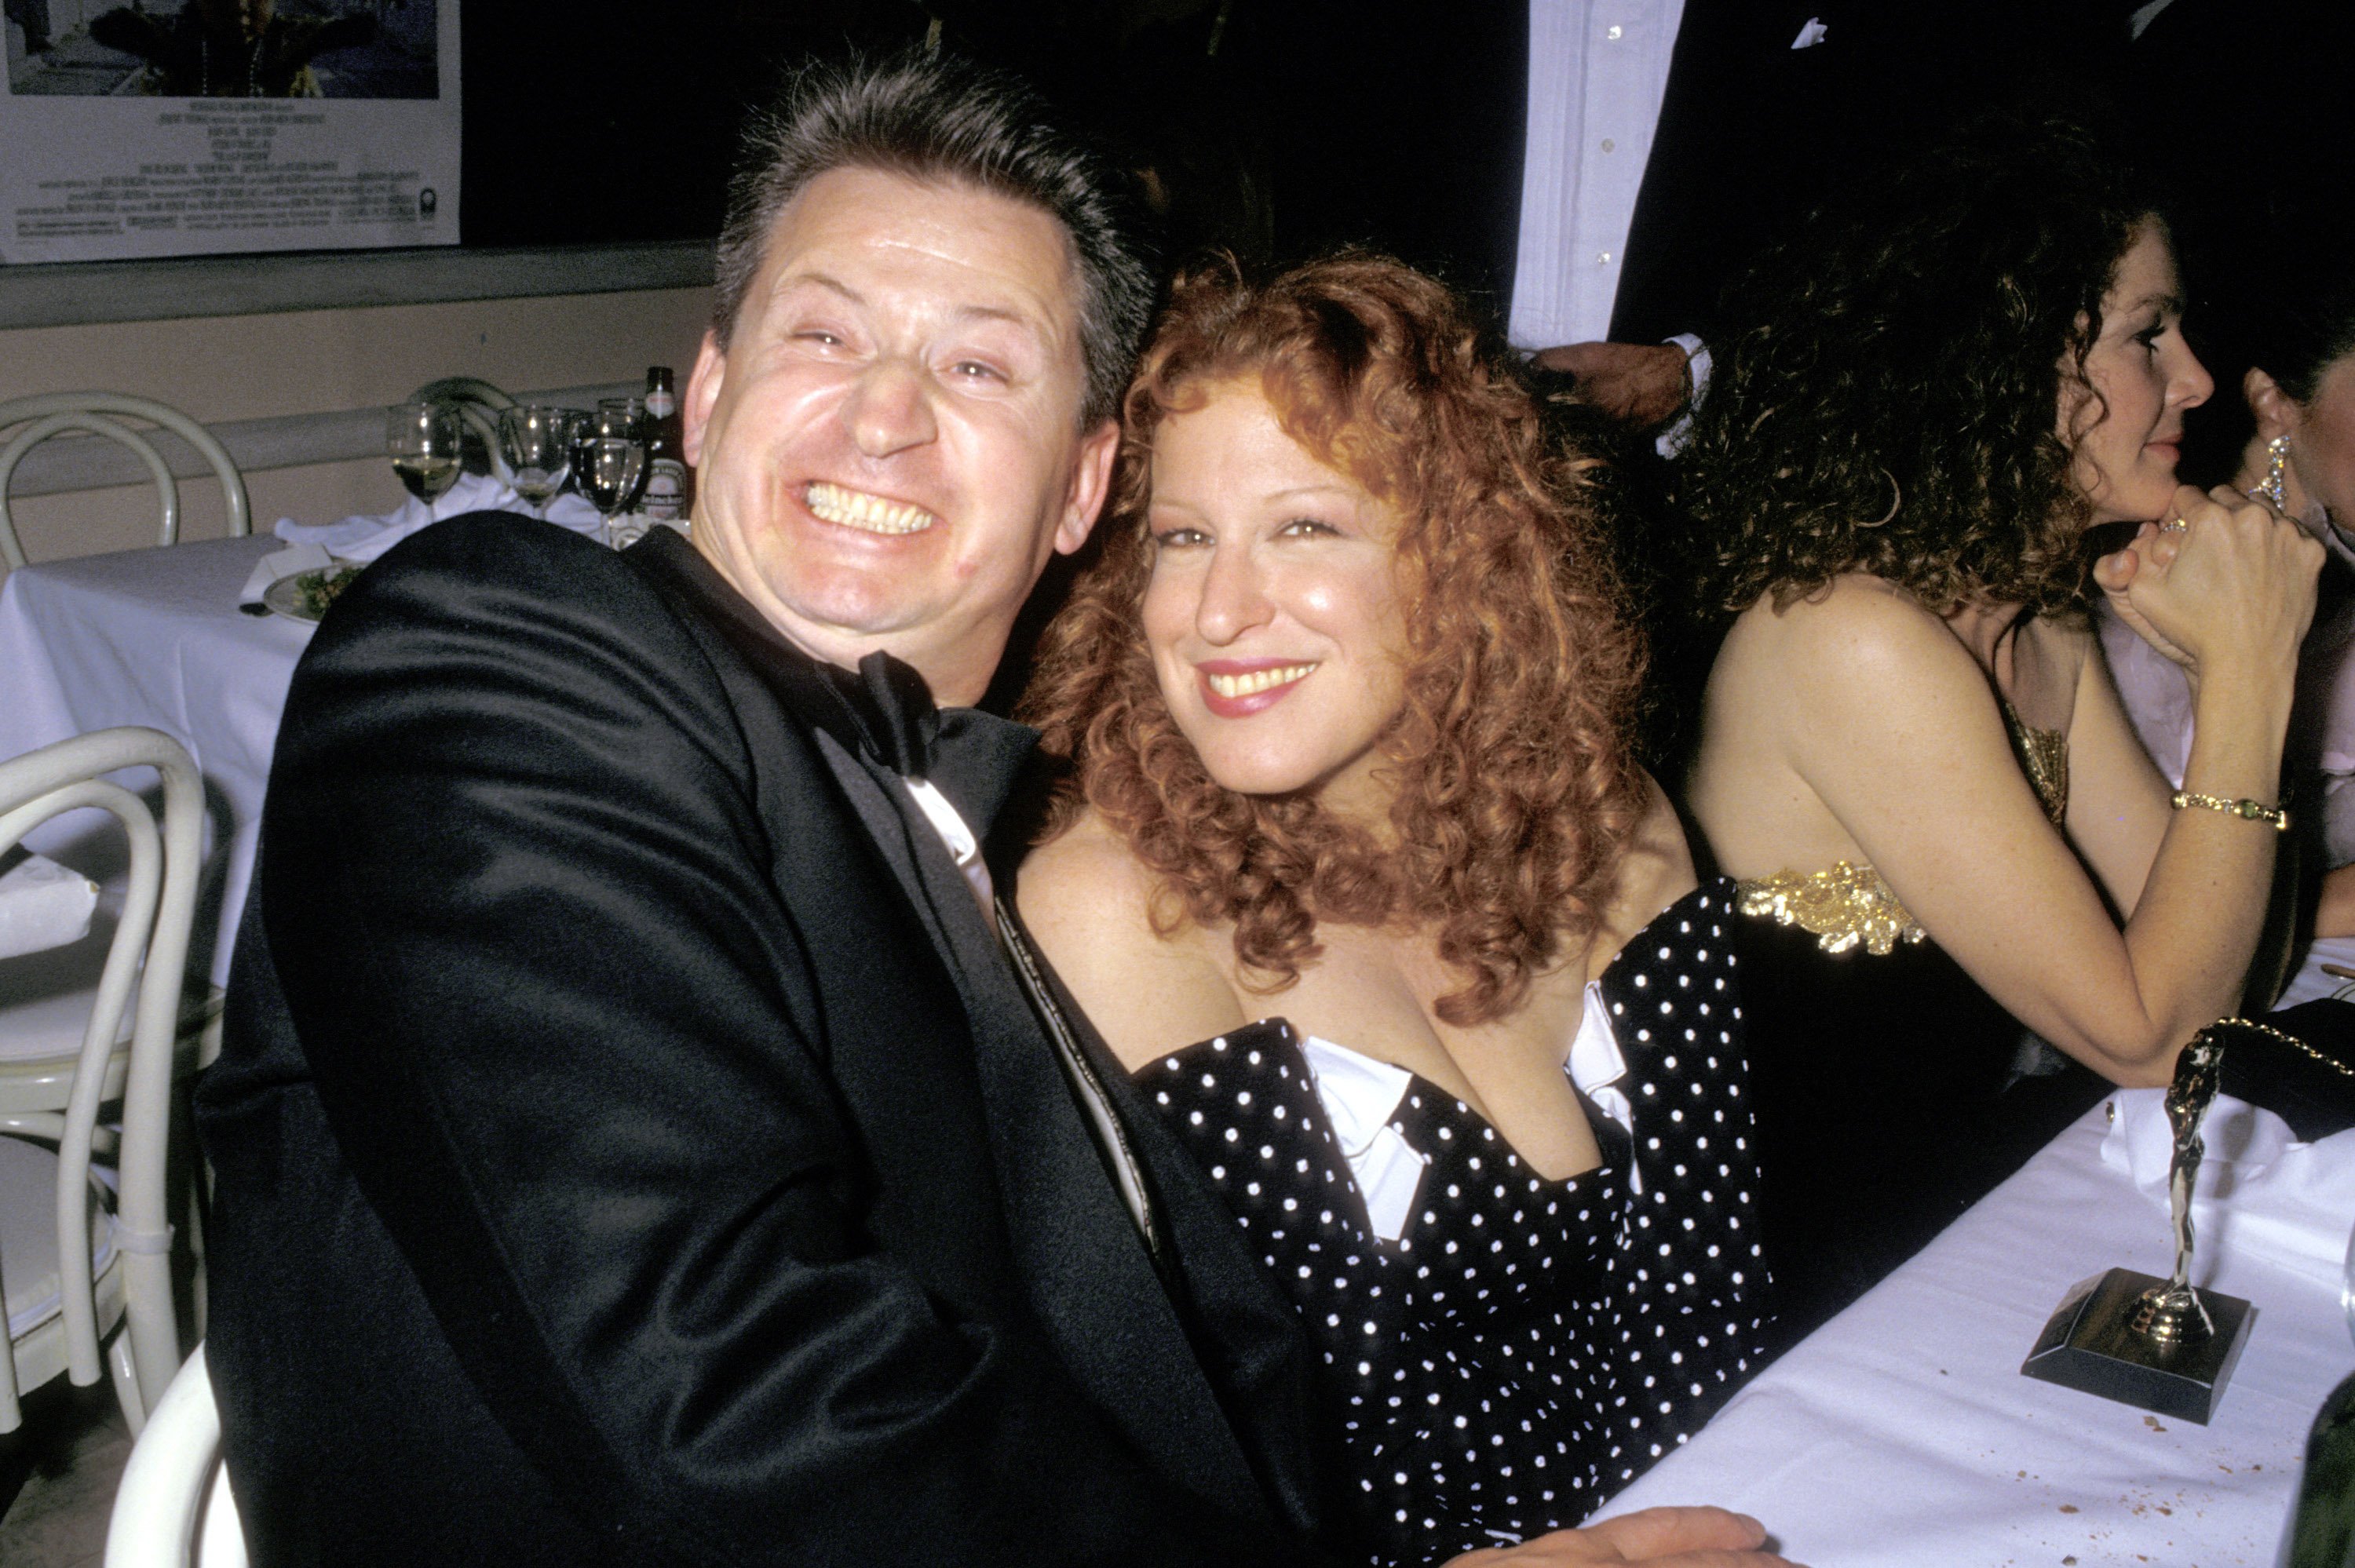 Bette Midler and husband Martin von Haselberg at Swifty Lazar Oscar Party in Hollywood, California | Source: Getty Images